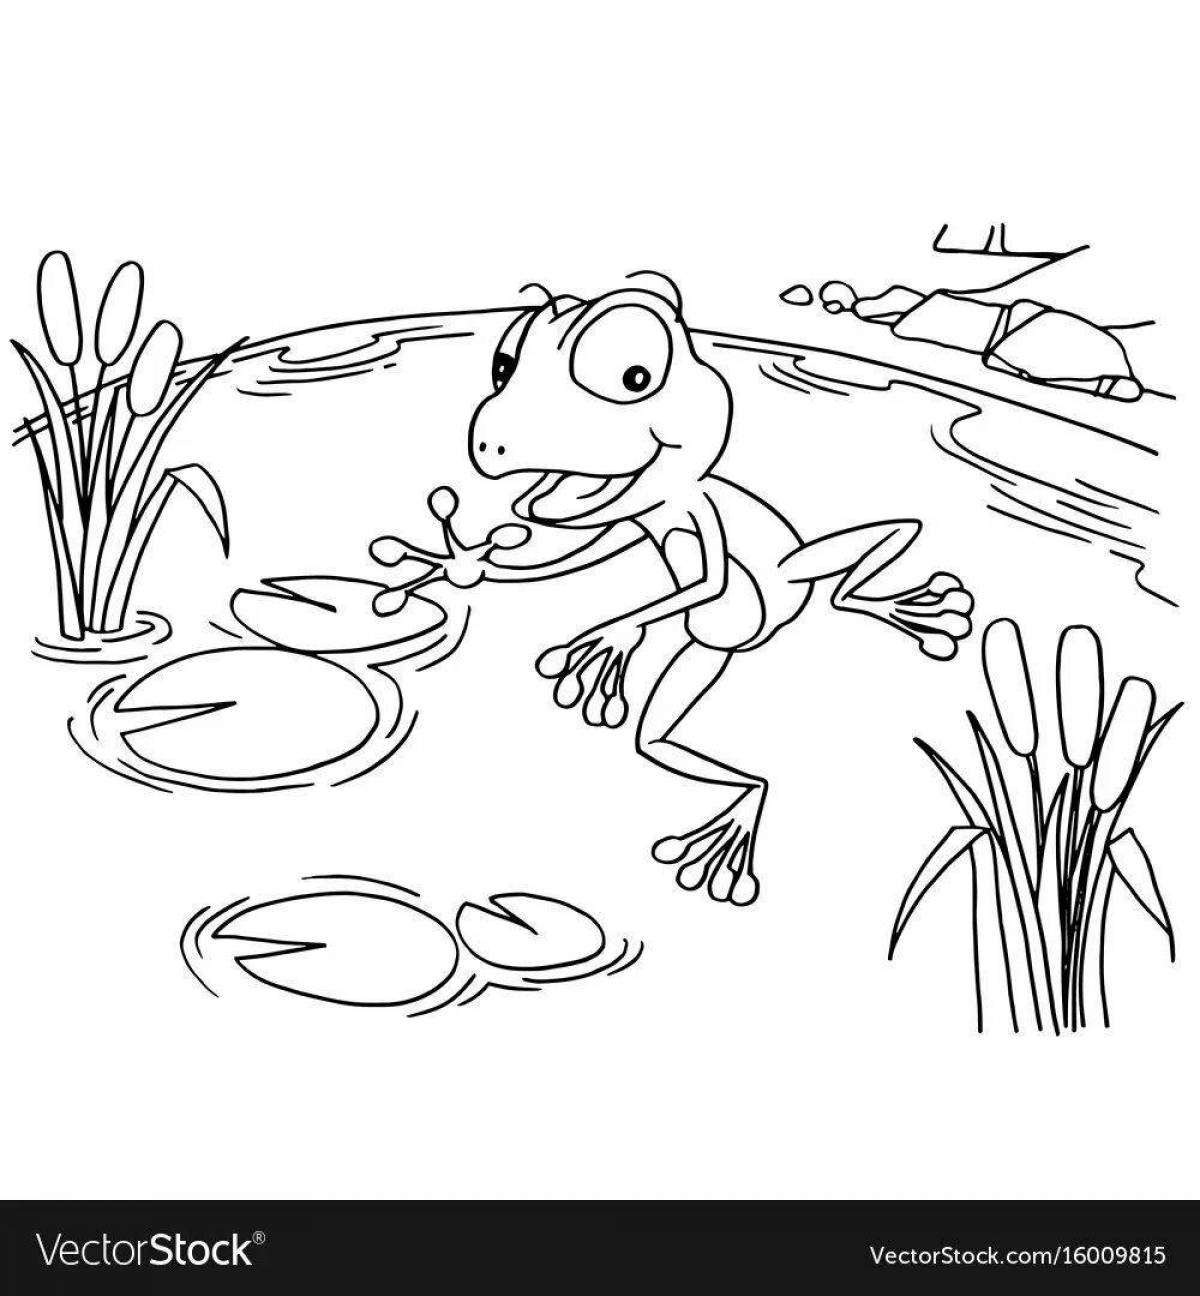 Amazing marsh coloring book for kids